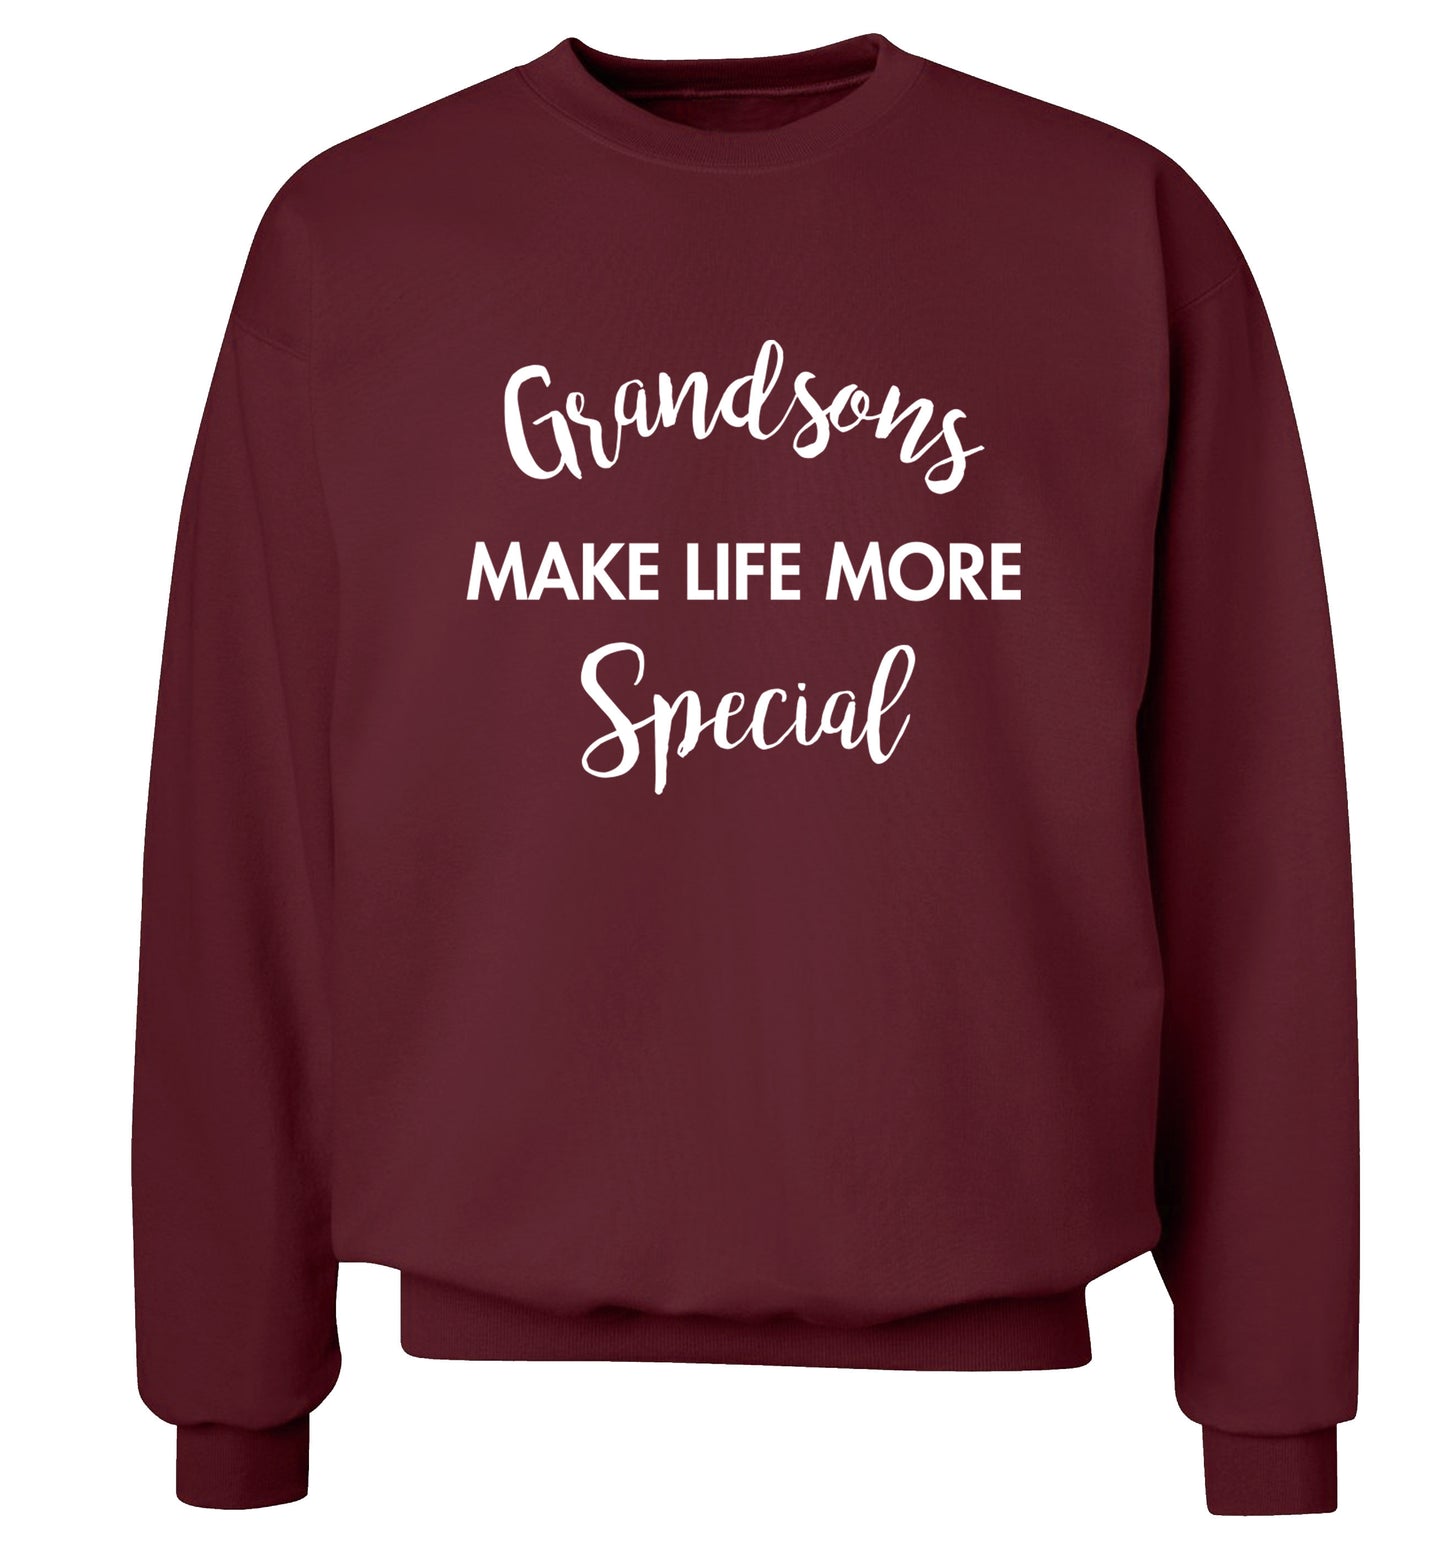 Grandsons make life more special Adult's unisex maroon Sweater 2XL